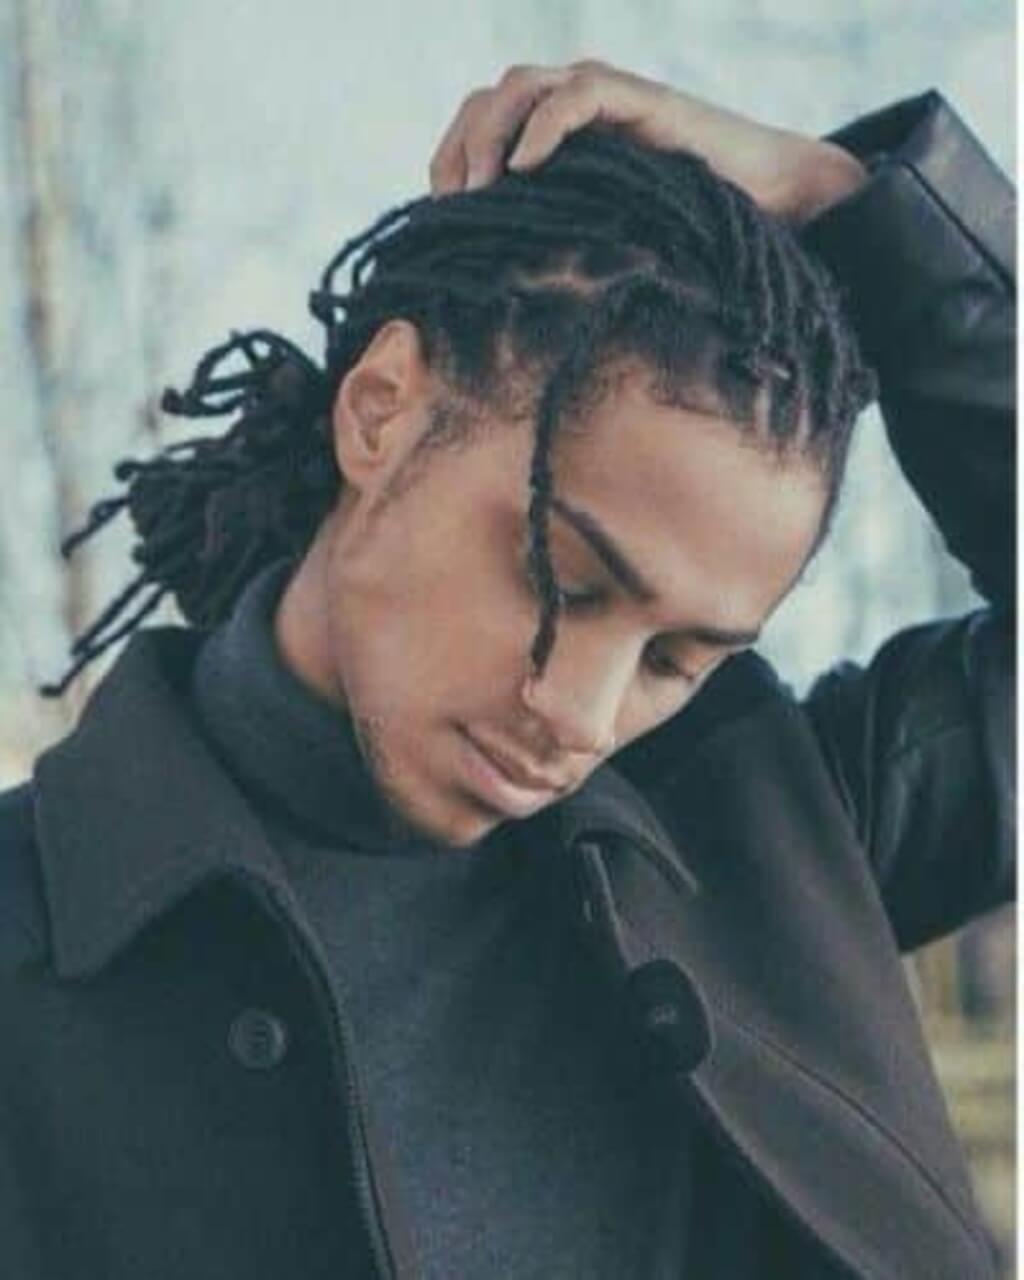 Two Strand Twist Dreads: Coolest Dreadlock Hairstyles In this year